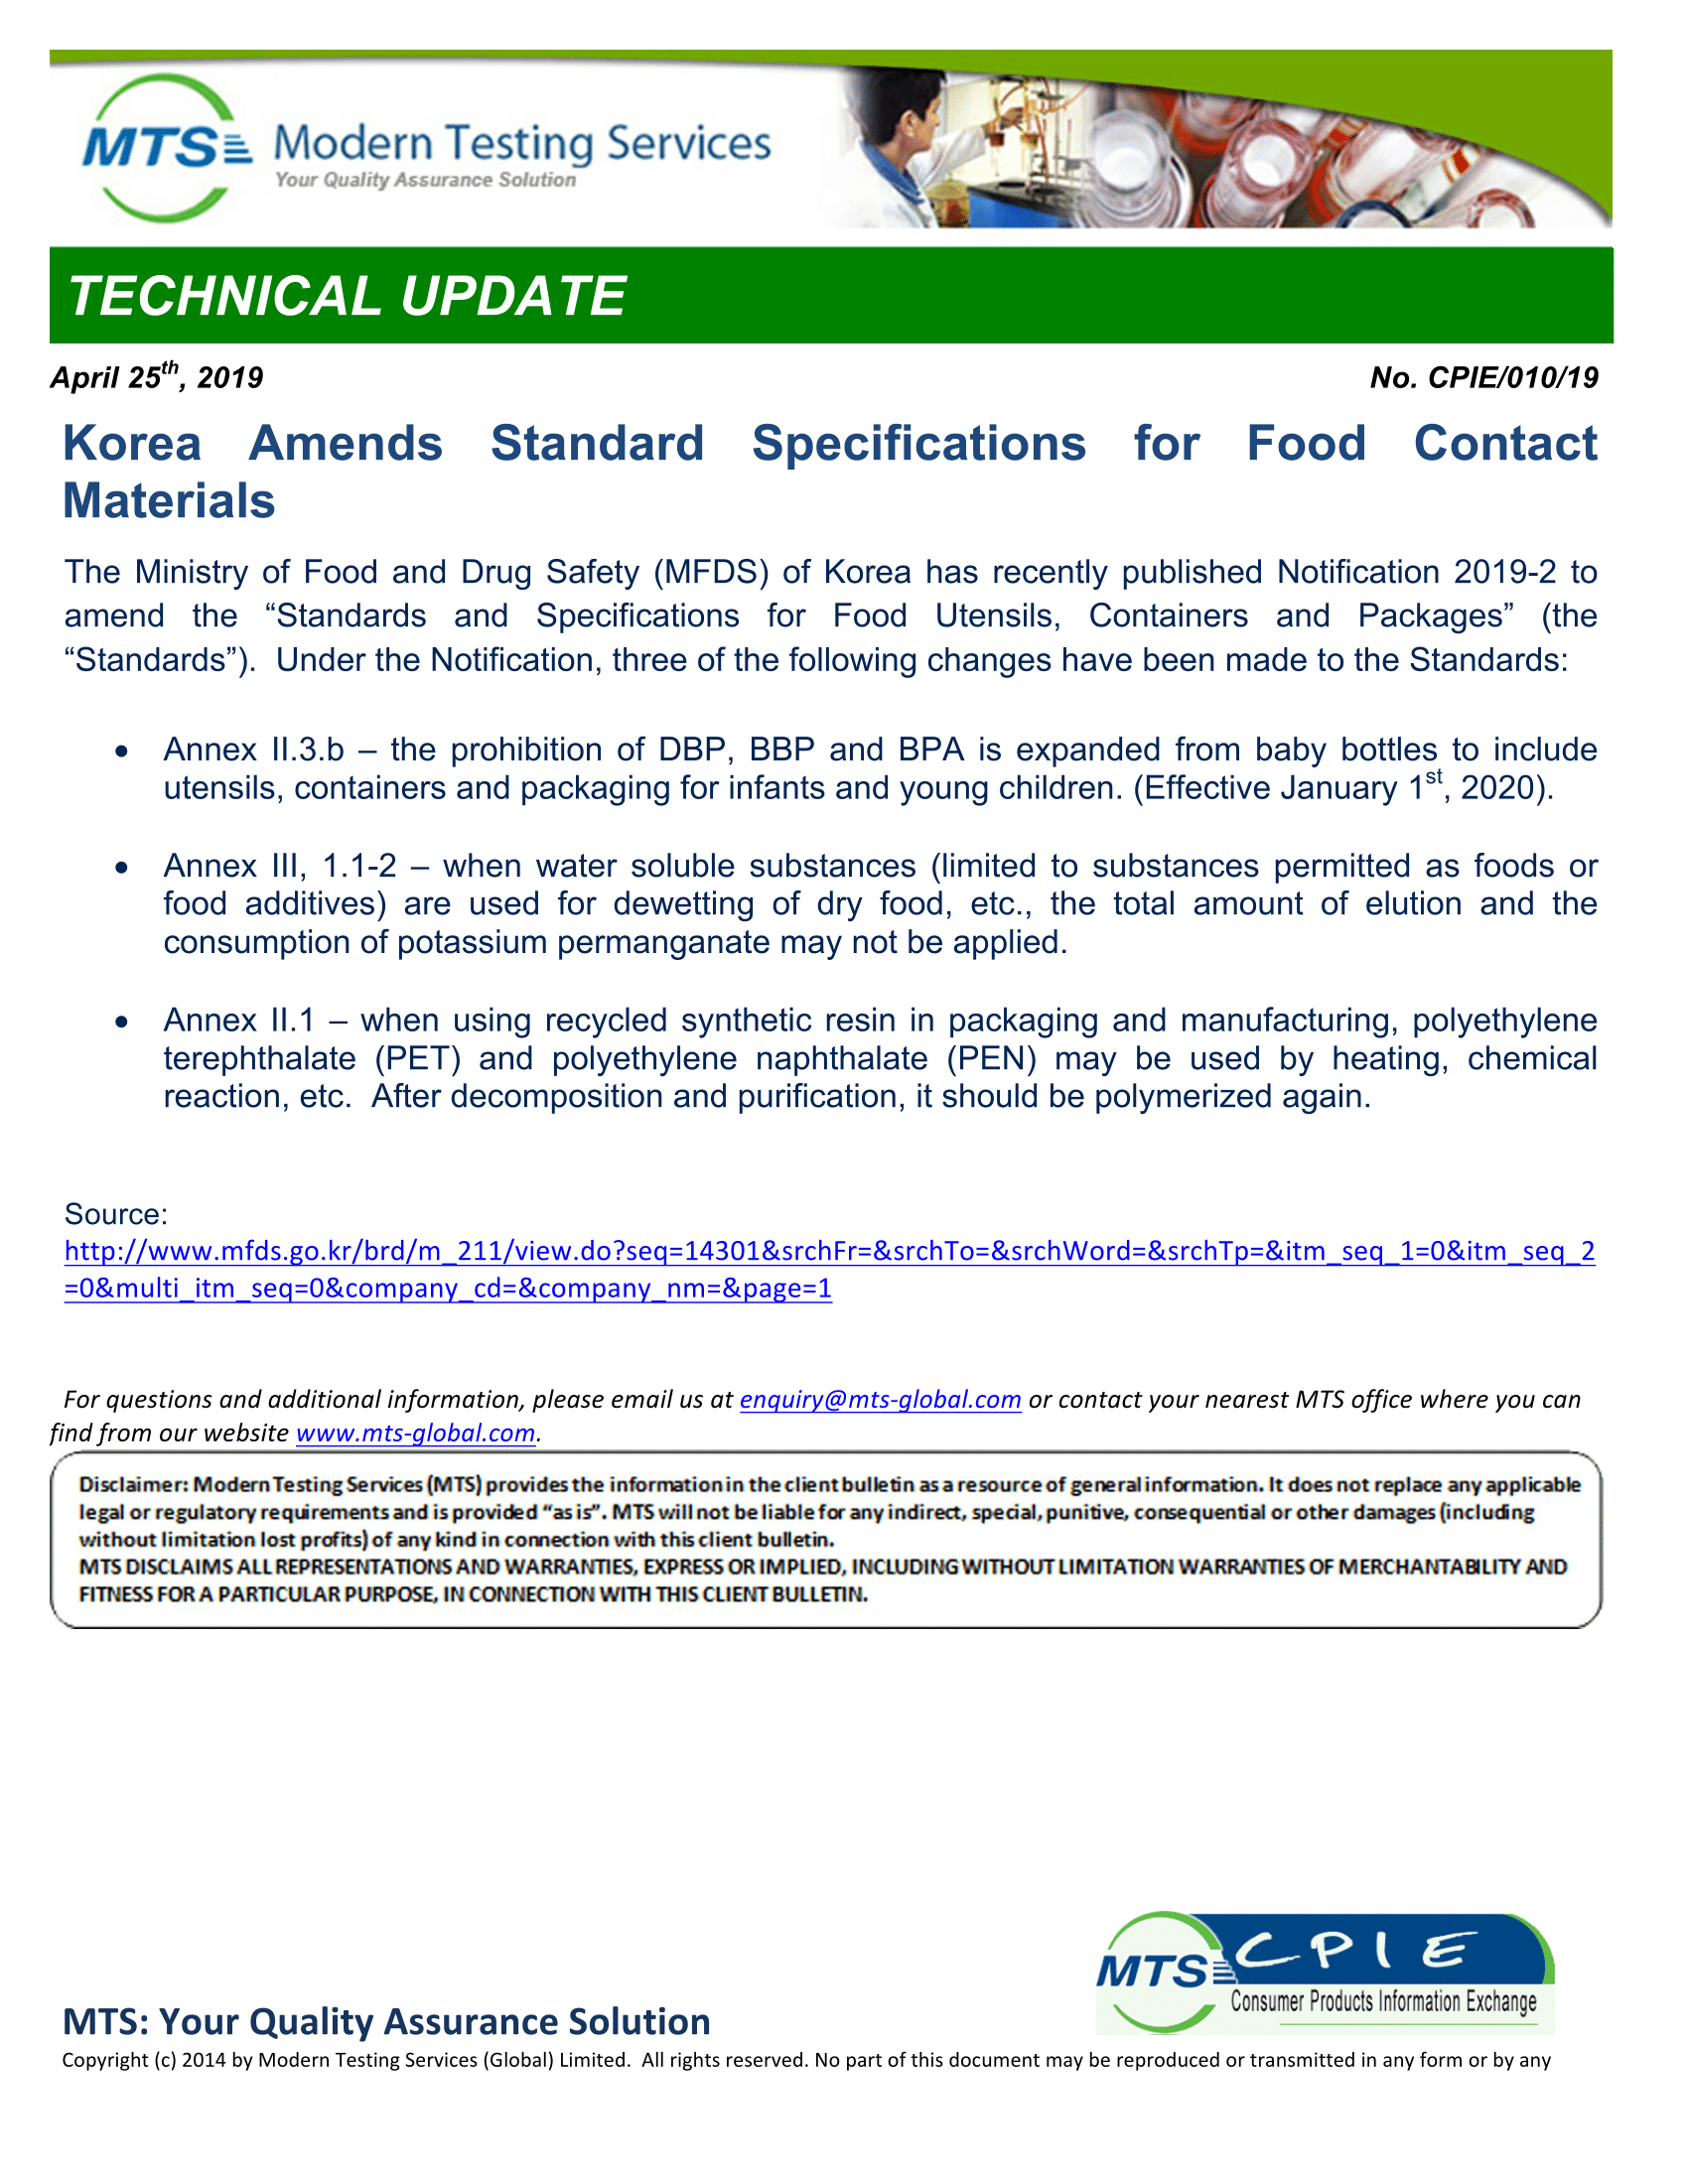 CPIE-010-19 Korea Amends Standard Specifications for Food Contact Materials  -1